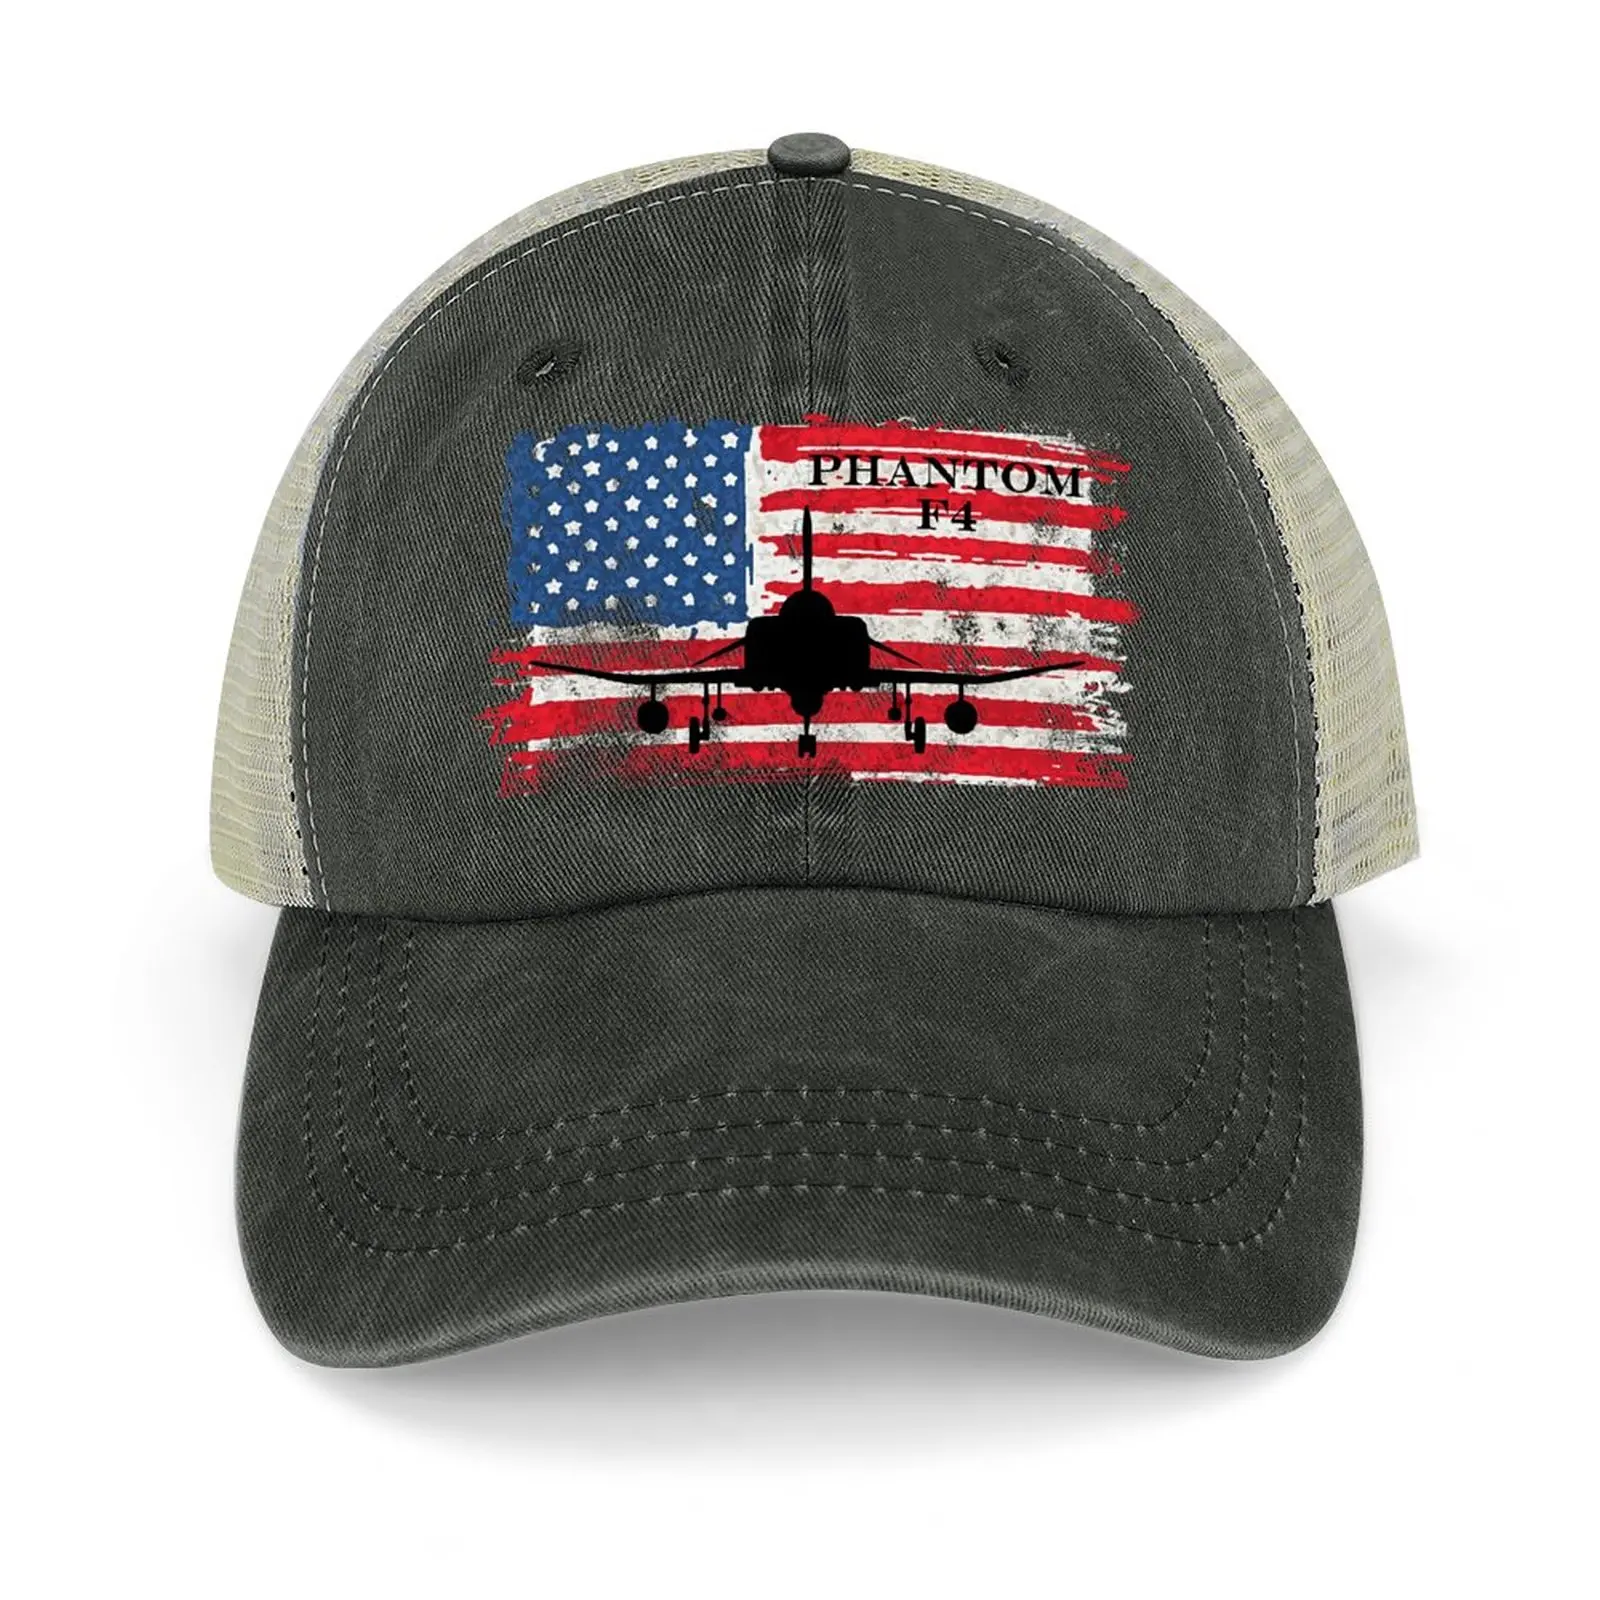 

F4 Phantom Fighter Jet US Military Distressed Flag Cowboy Hat Anime Hat Christmas Hat Caps Male Women's